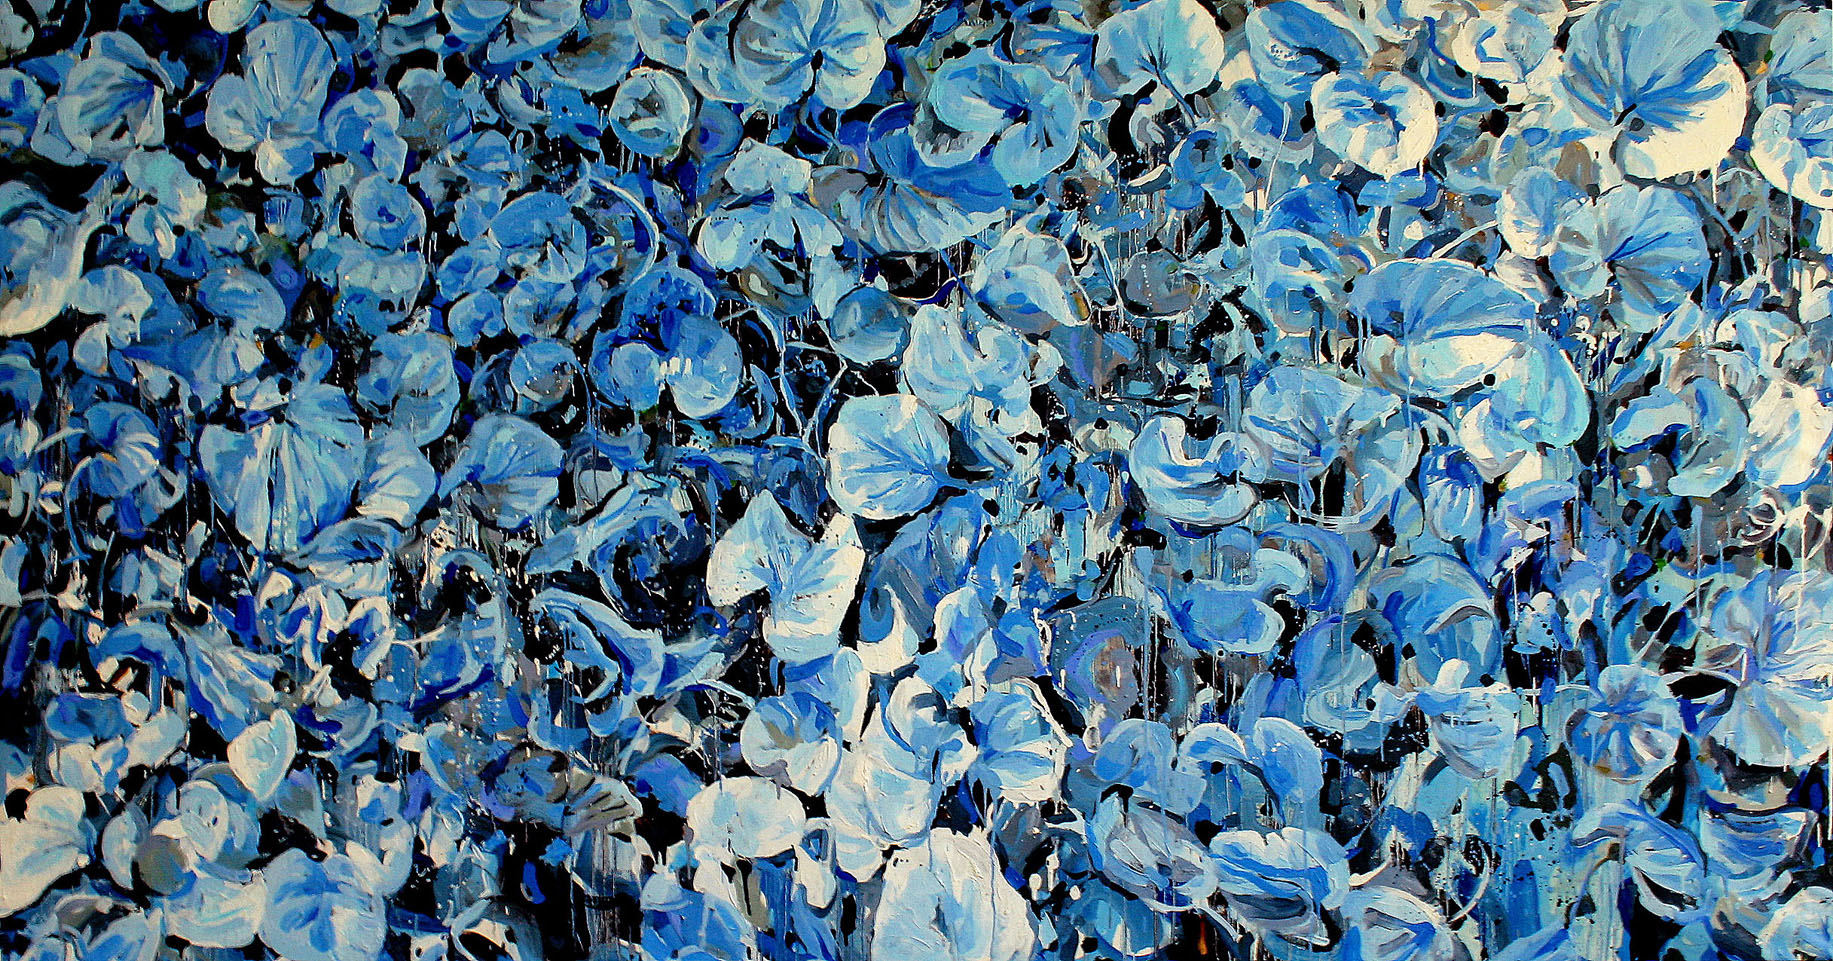 Blue Leaves, oil on canvas, 105x45 in, Jessica Siemens 2009, 2010 Aztec Purchase Award, San Diego State University, California